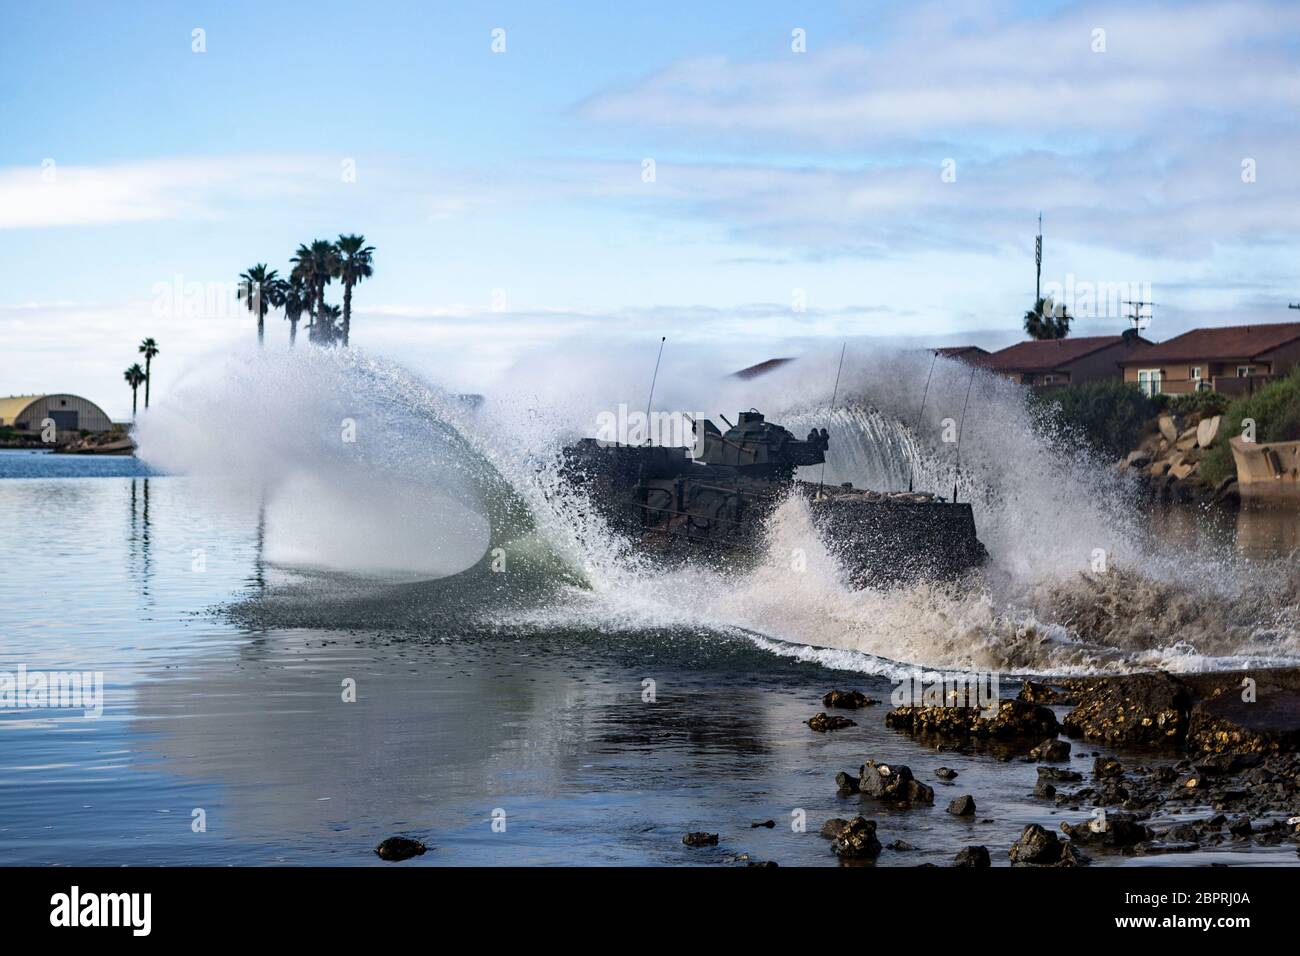 An AAV-P7/A1 Amphibious Assault Vehicle with Assault Amphibian School splashes into the Del Mar Boat Basin on Marine Corps Base Camp Pendleton, California, May 18, 2020. The students are currently participating in the 55 day-long assault amphibian crewman course, where they are taught to maintain an AAV and associated equipment, how to operate an AAV on land and water along with introductory troubleshooting and self-recovery maneuvers. (U.S. Marine Corps photo by Lance Cpl. Drake Nickels) Stock Photo